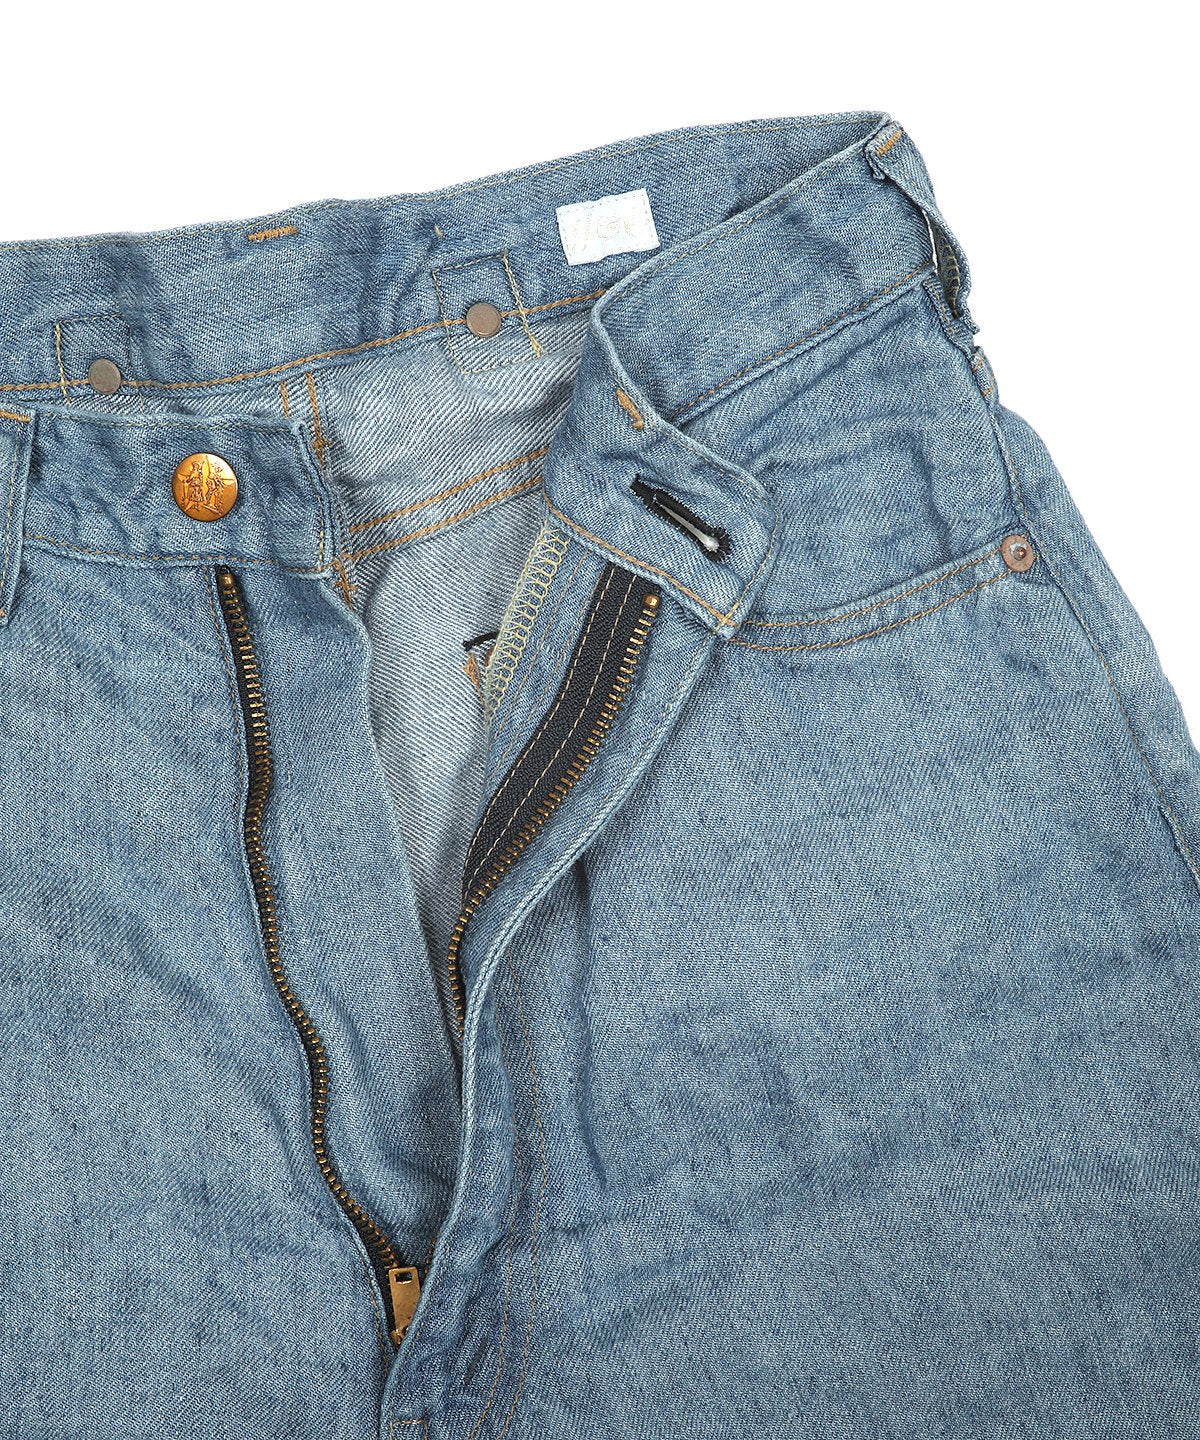 YOUNG & OLSEN The DRYGOODS STORE】/30´S LADY LINEN JEANS-